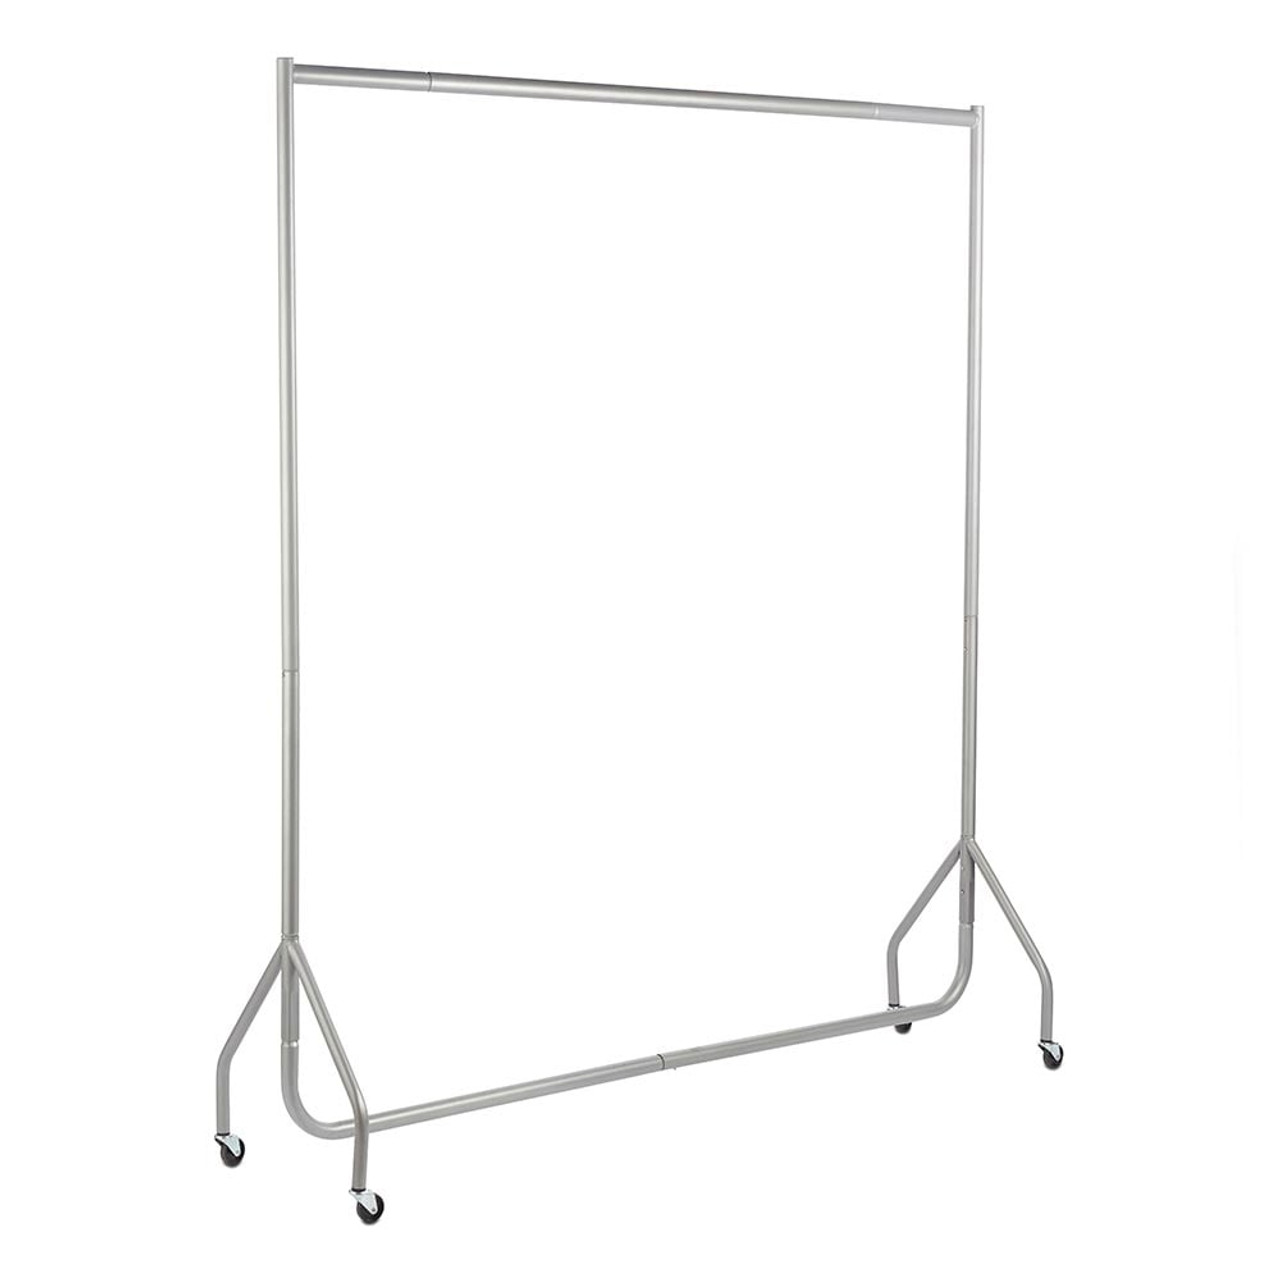 NEW HEAVY DUTY CHROME TOP BLACK CLOTHES,GARMENT RAILS WITH  3ft 4ft 5ft 6ft 